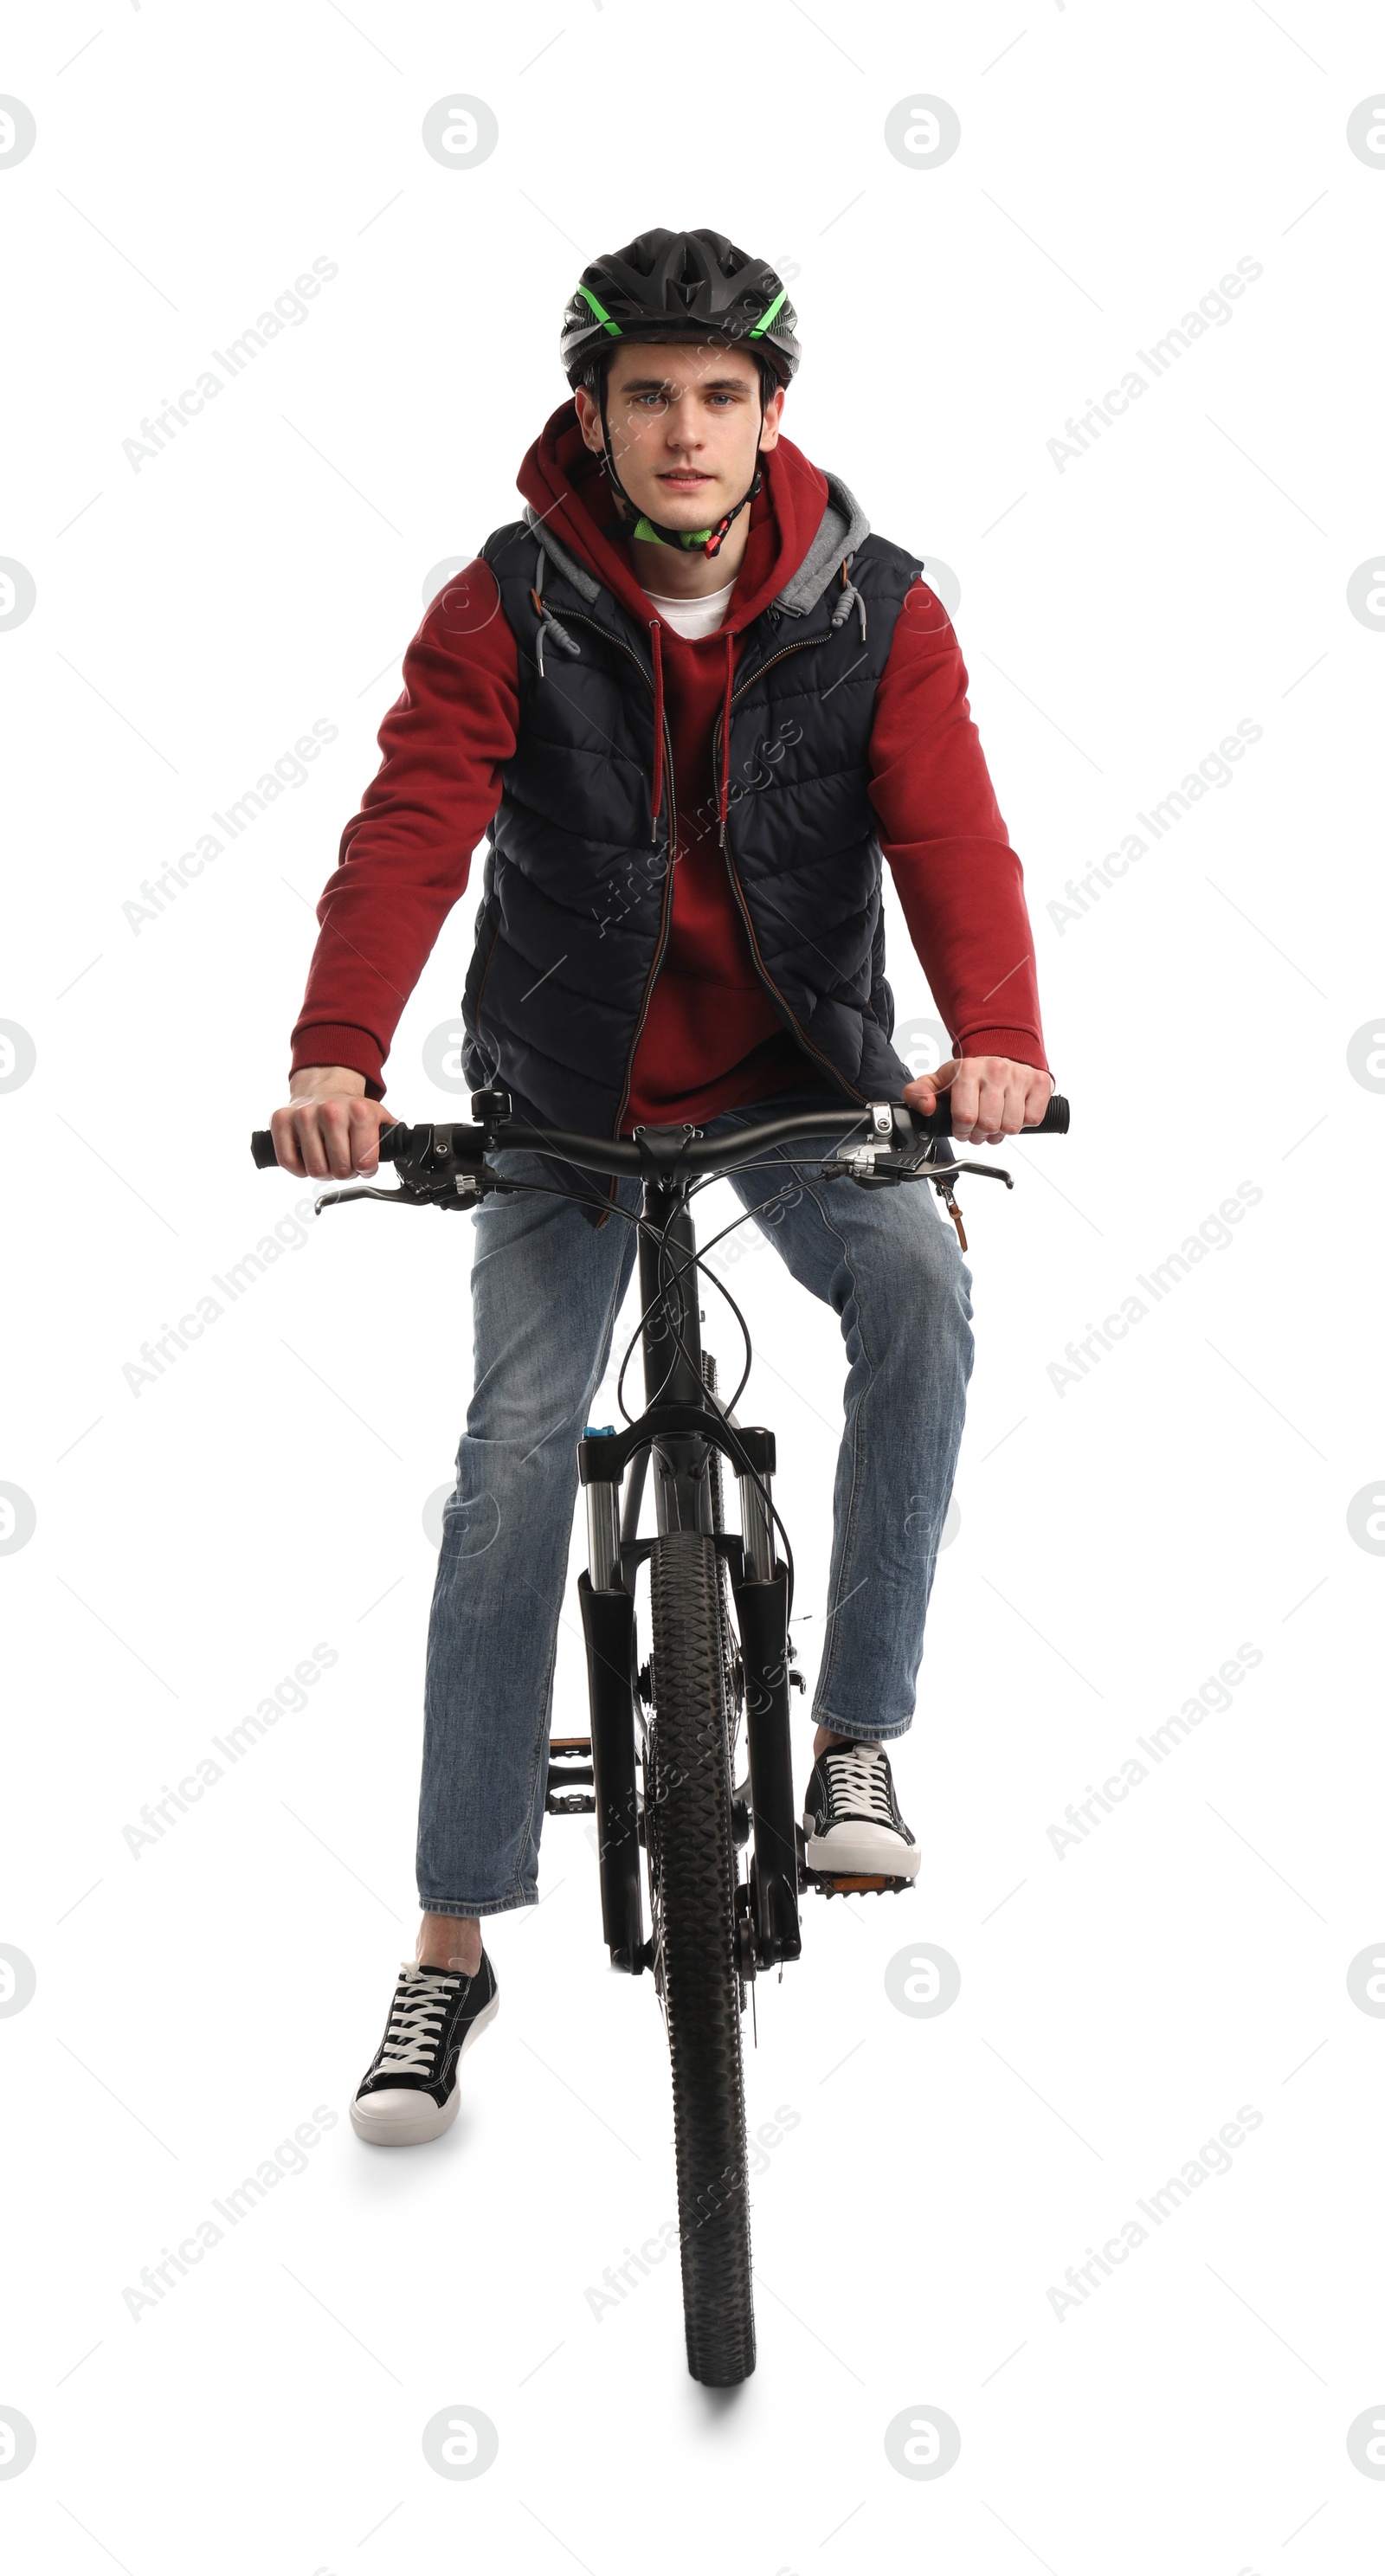 Photo of Man in helmet riding bicycle on white background